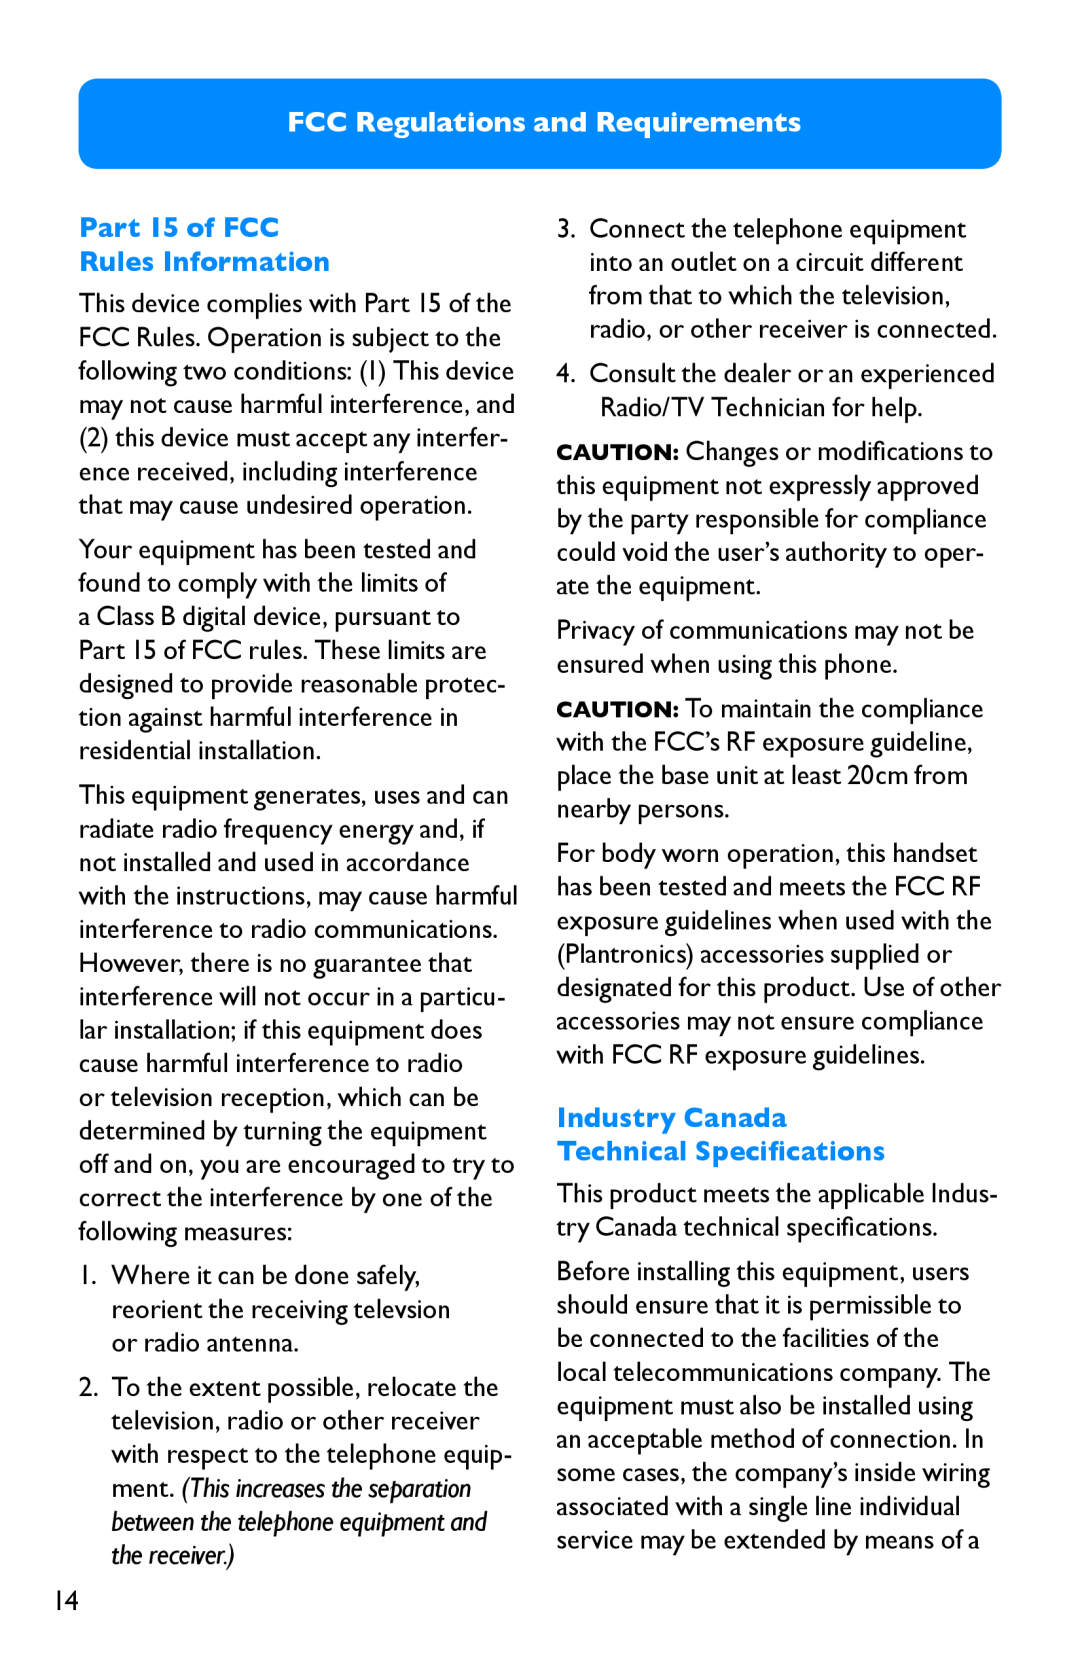 Clarity Pal FCC Regulations and Requirements, Part 15 of FCC Rules Information, Industry Canada Technical Specifications 